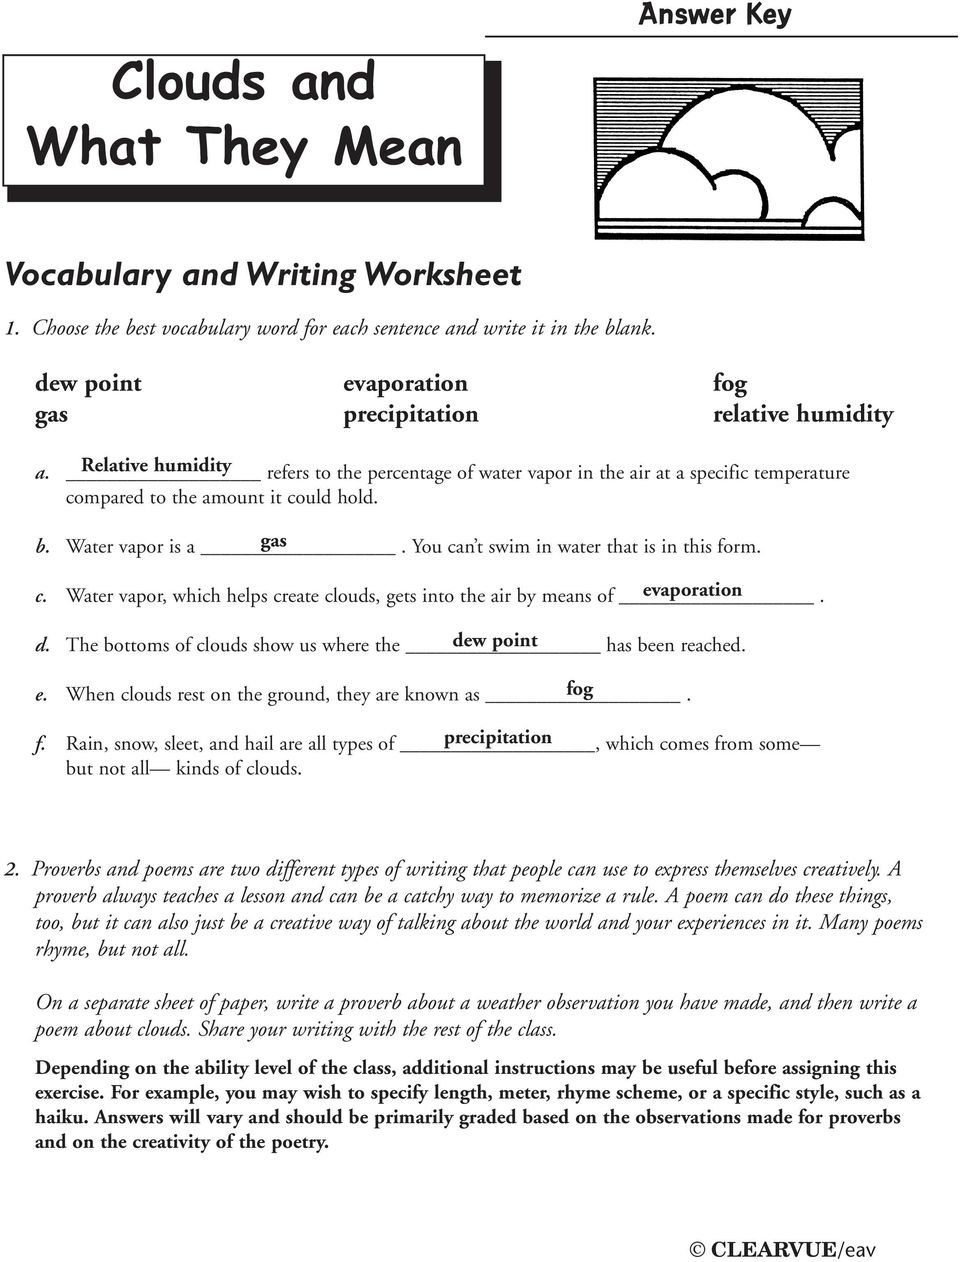 Clouds and What They Mean - PDF Free Download Regarding Types Of Clouds Worksheet